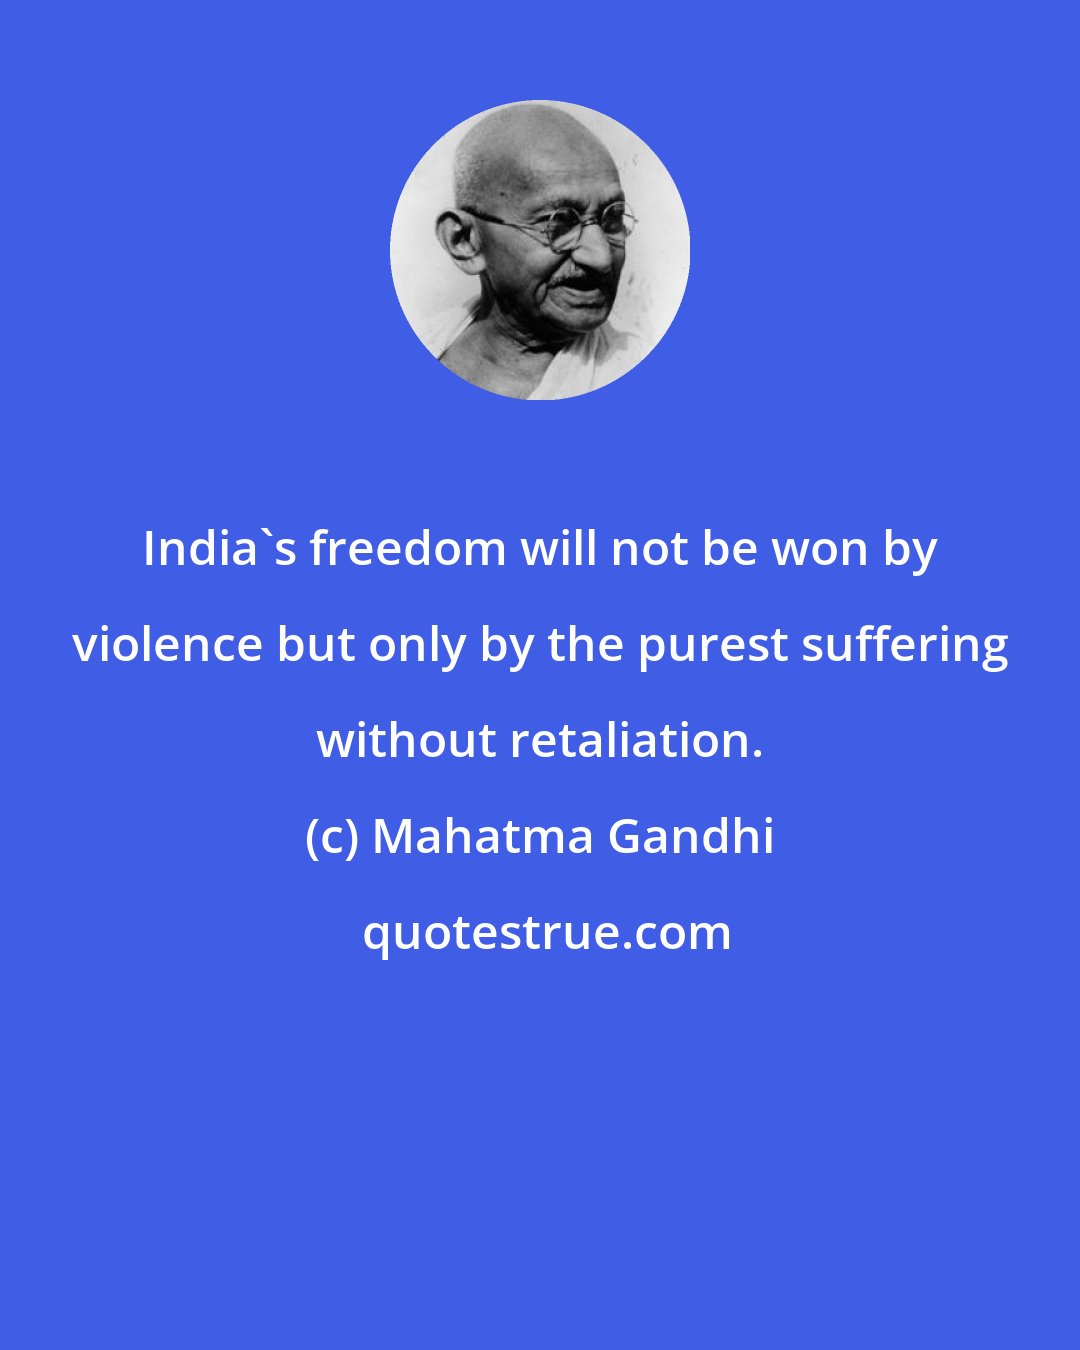 Mahatma Gandhi: India's freedom will not be won by violence but only by the purest suffering without retaliation.